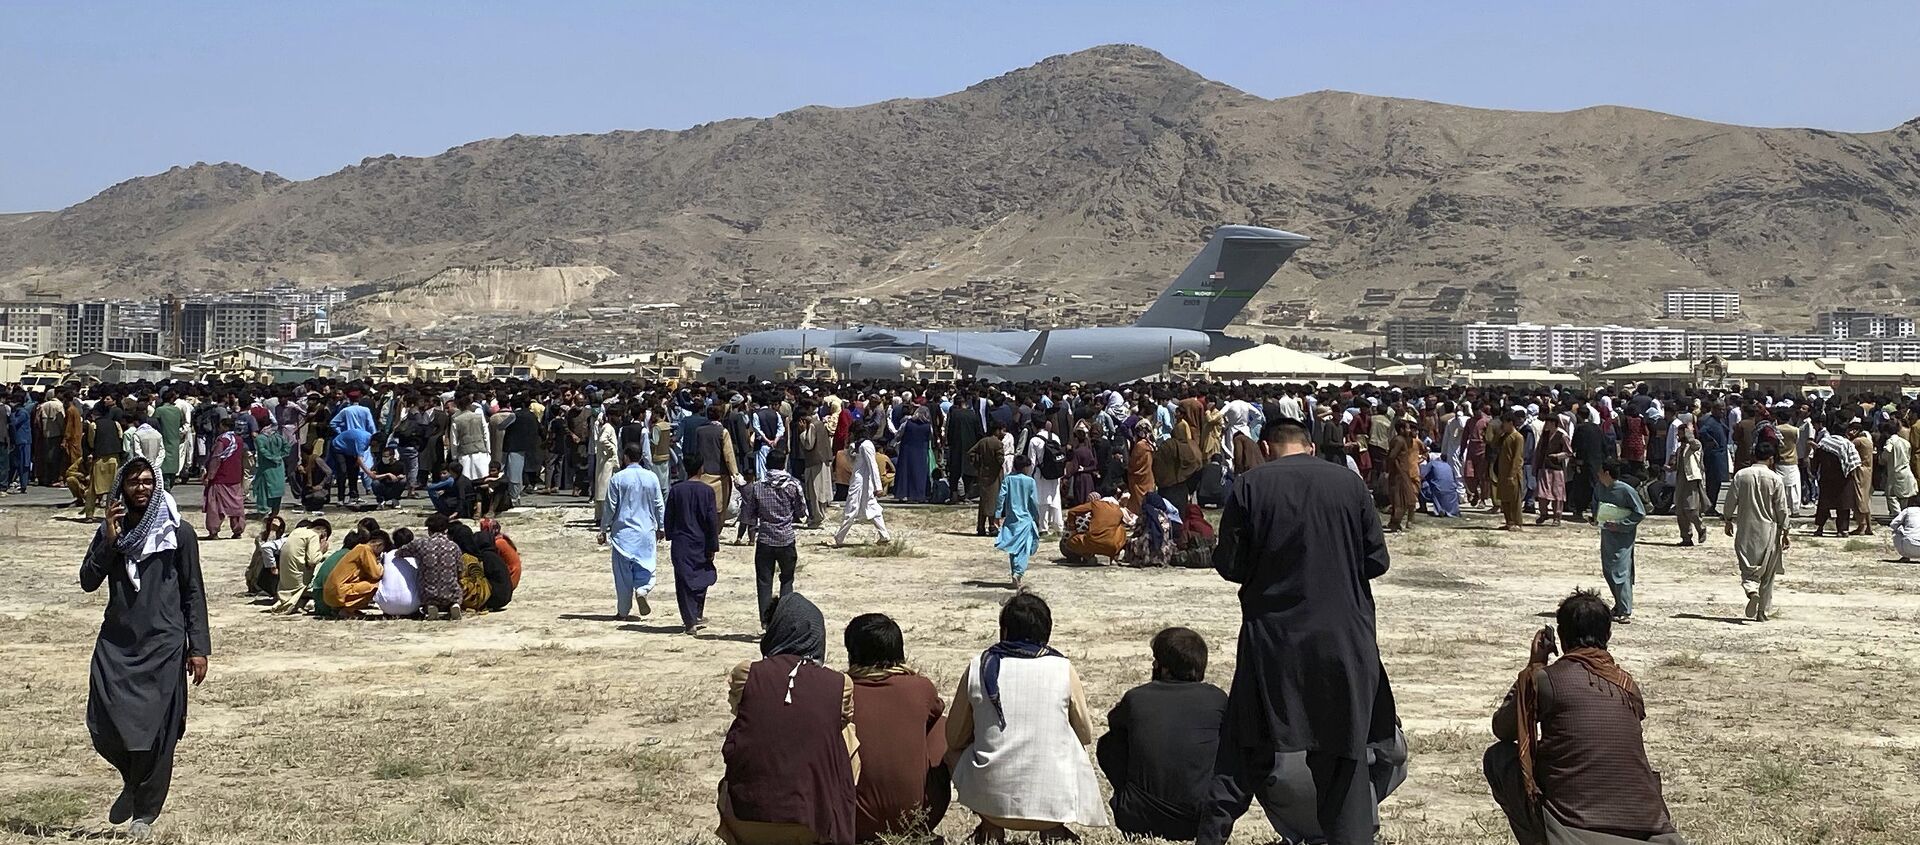 Hundreds of people gather near a U.S. Air Force C-17 transport plane at a perimeter at the international airport in Kabul, Afghanistan, Monday, Aug. 16, 2021. On Monday, the U.S. military and officials focus was on Kabul’s airport, where thousands of Afghans trapped by the sudden Taliban takeover rushed the tarmac and clung to U.S. military planes deployed to fly out staffers of the U.S. Embassy, which shut down Sunday, and others - Sputnik International, 1920